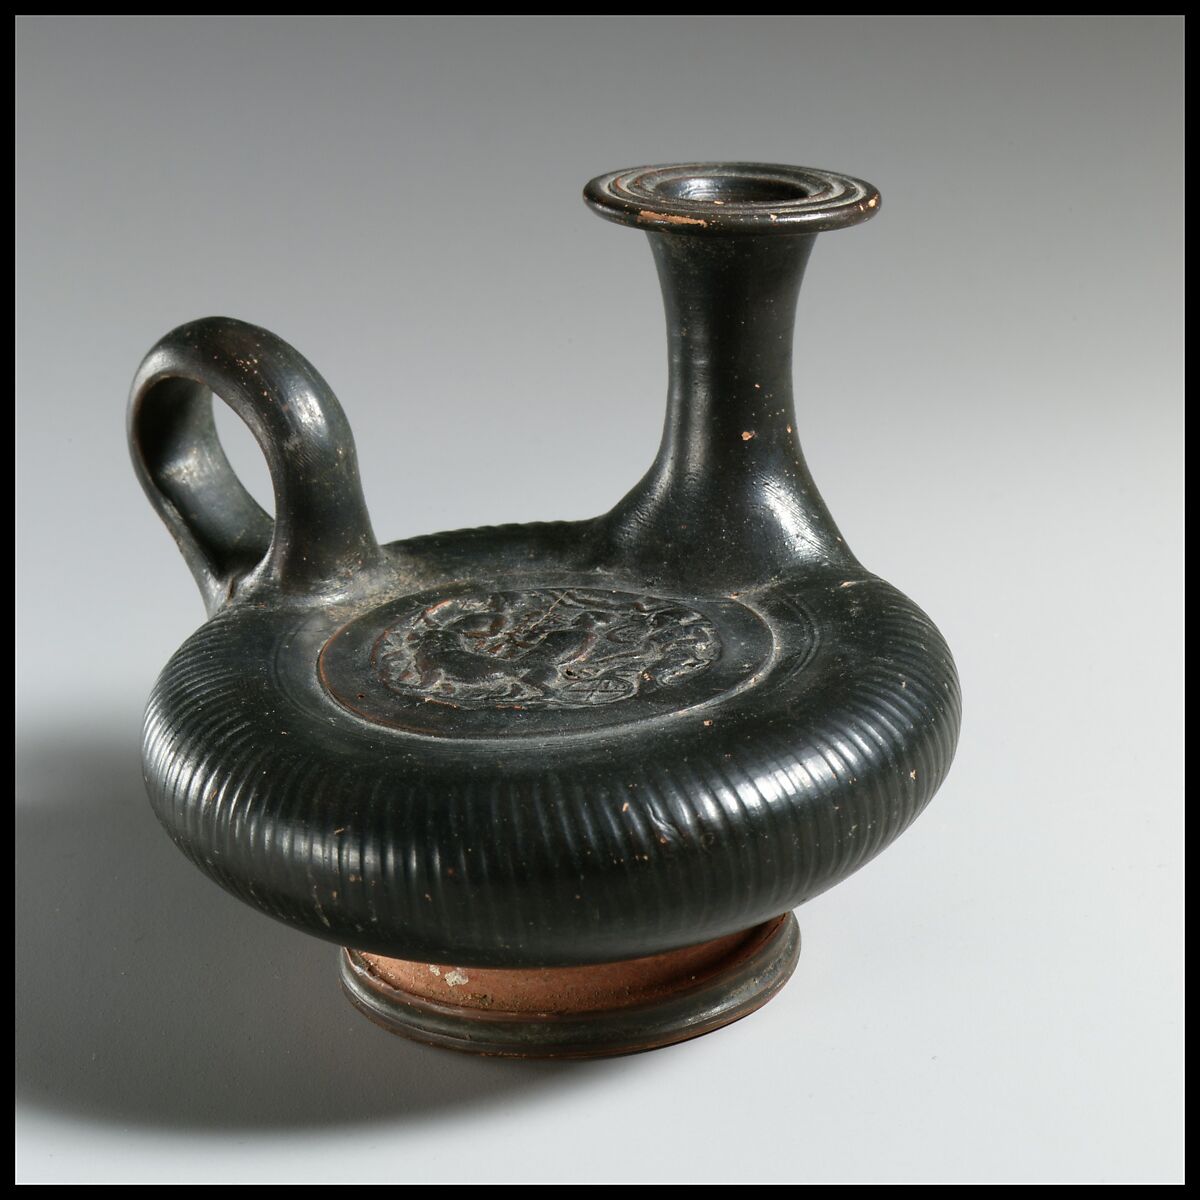 Terracotta guttus (flask with handle and vertical spout), Terracotta, Greek, South Italian, Campanian 